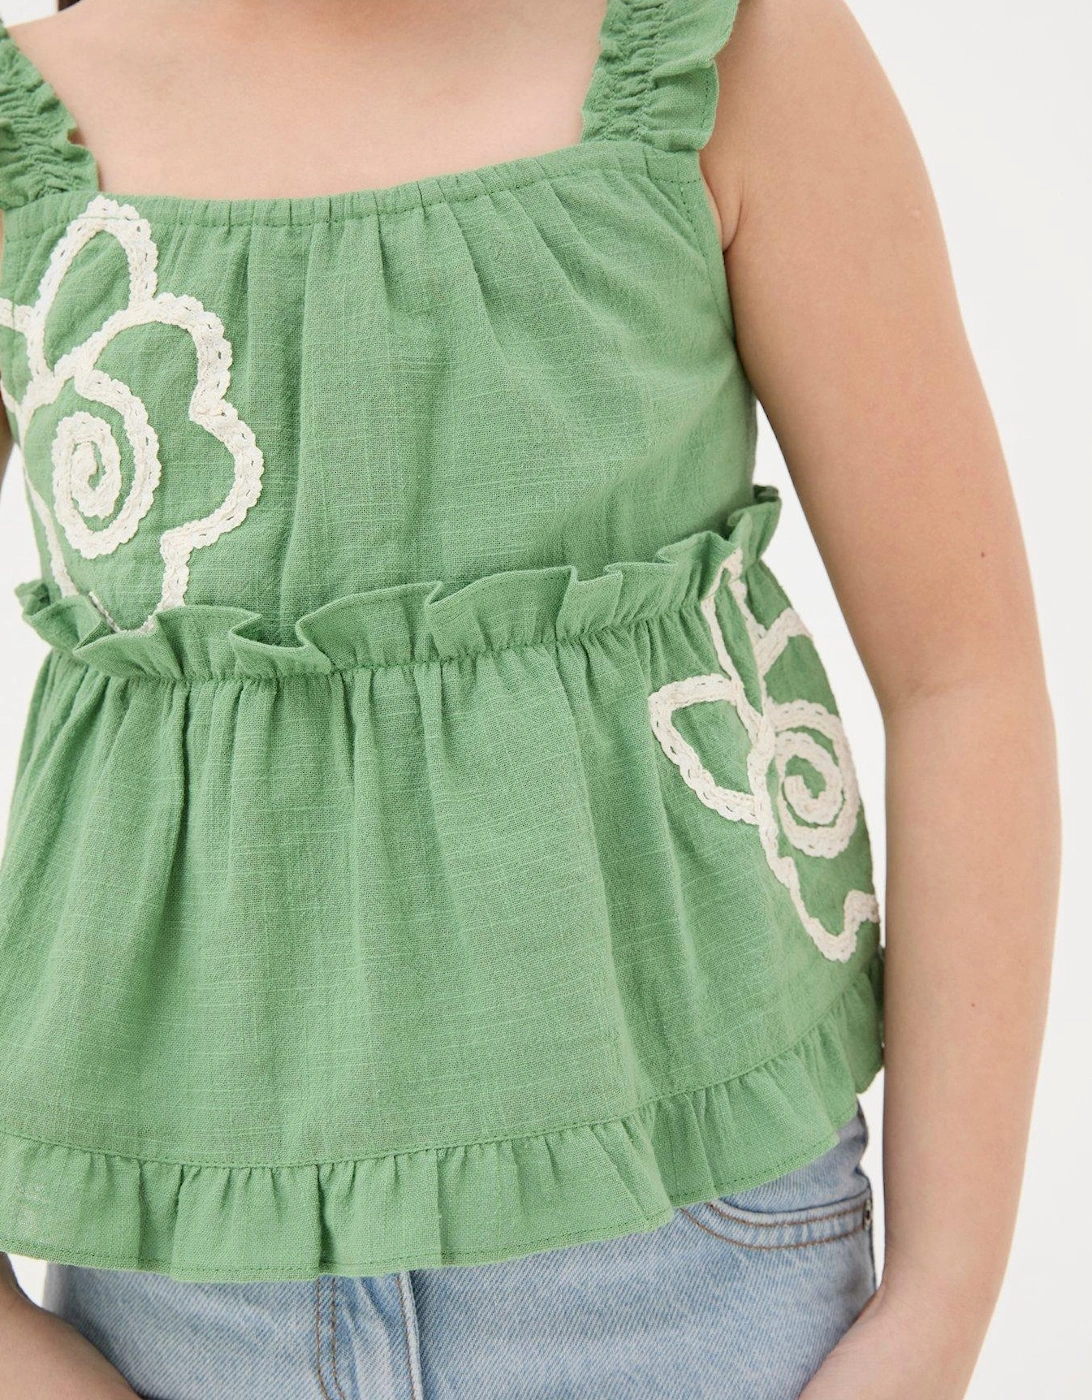 Girls Flower Embroidered Cami Top - Green